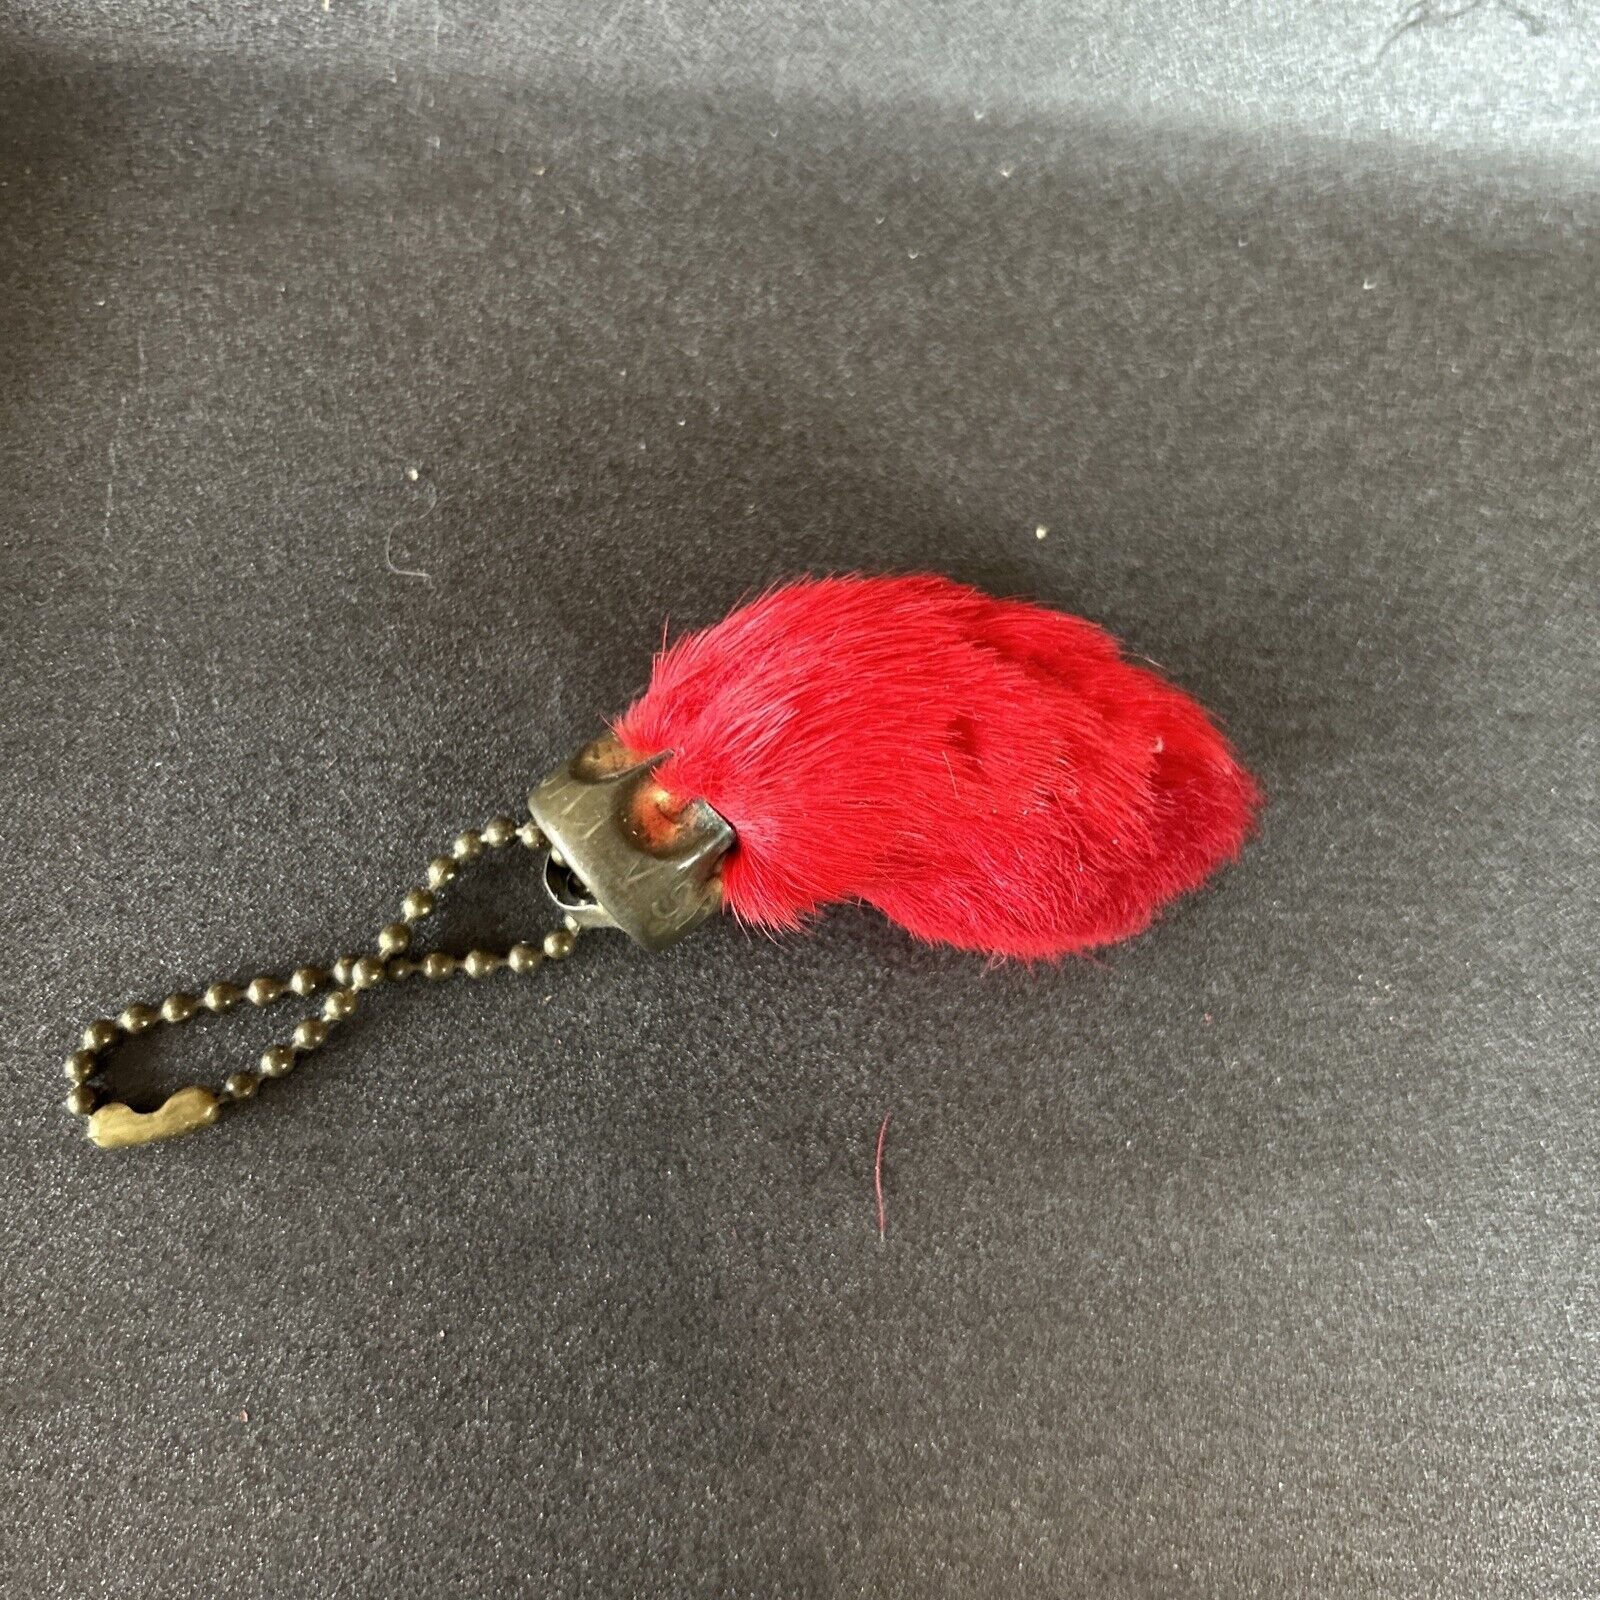 Vintage Red Rabbits Foot Keychain Lucky Good Luck Charm Keytag Amulet Gift 